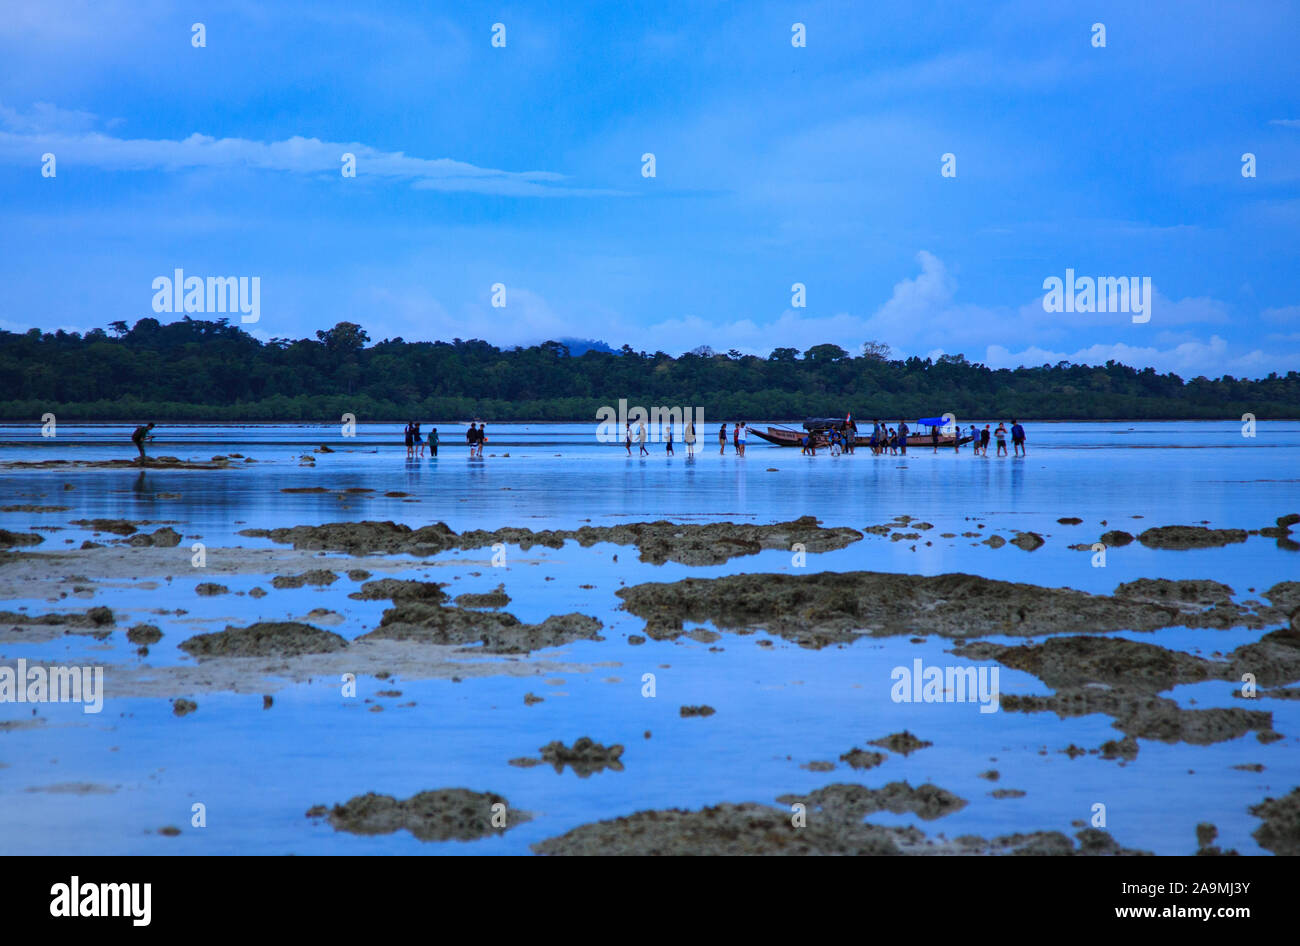 A group of travellers engaging in the educational activity of inter-tidal walk at Havelock Island (Andaman, India) Stock Photo